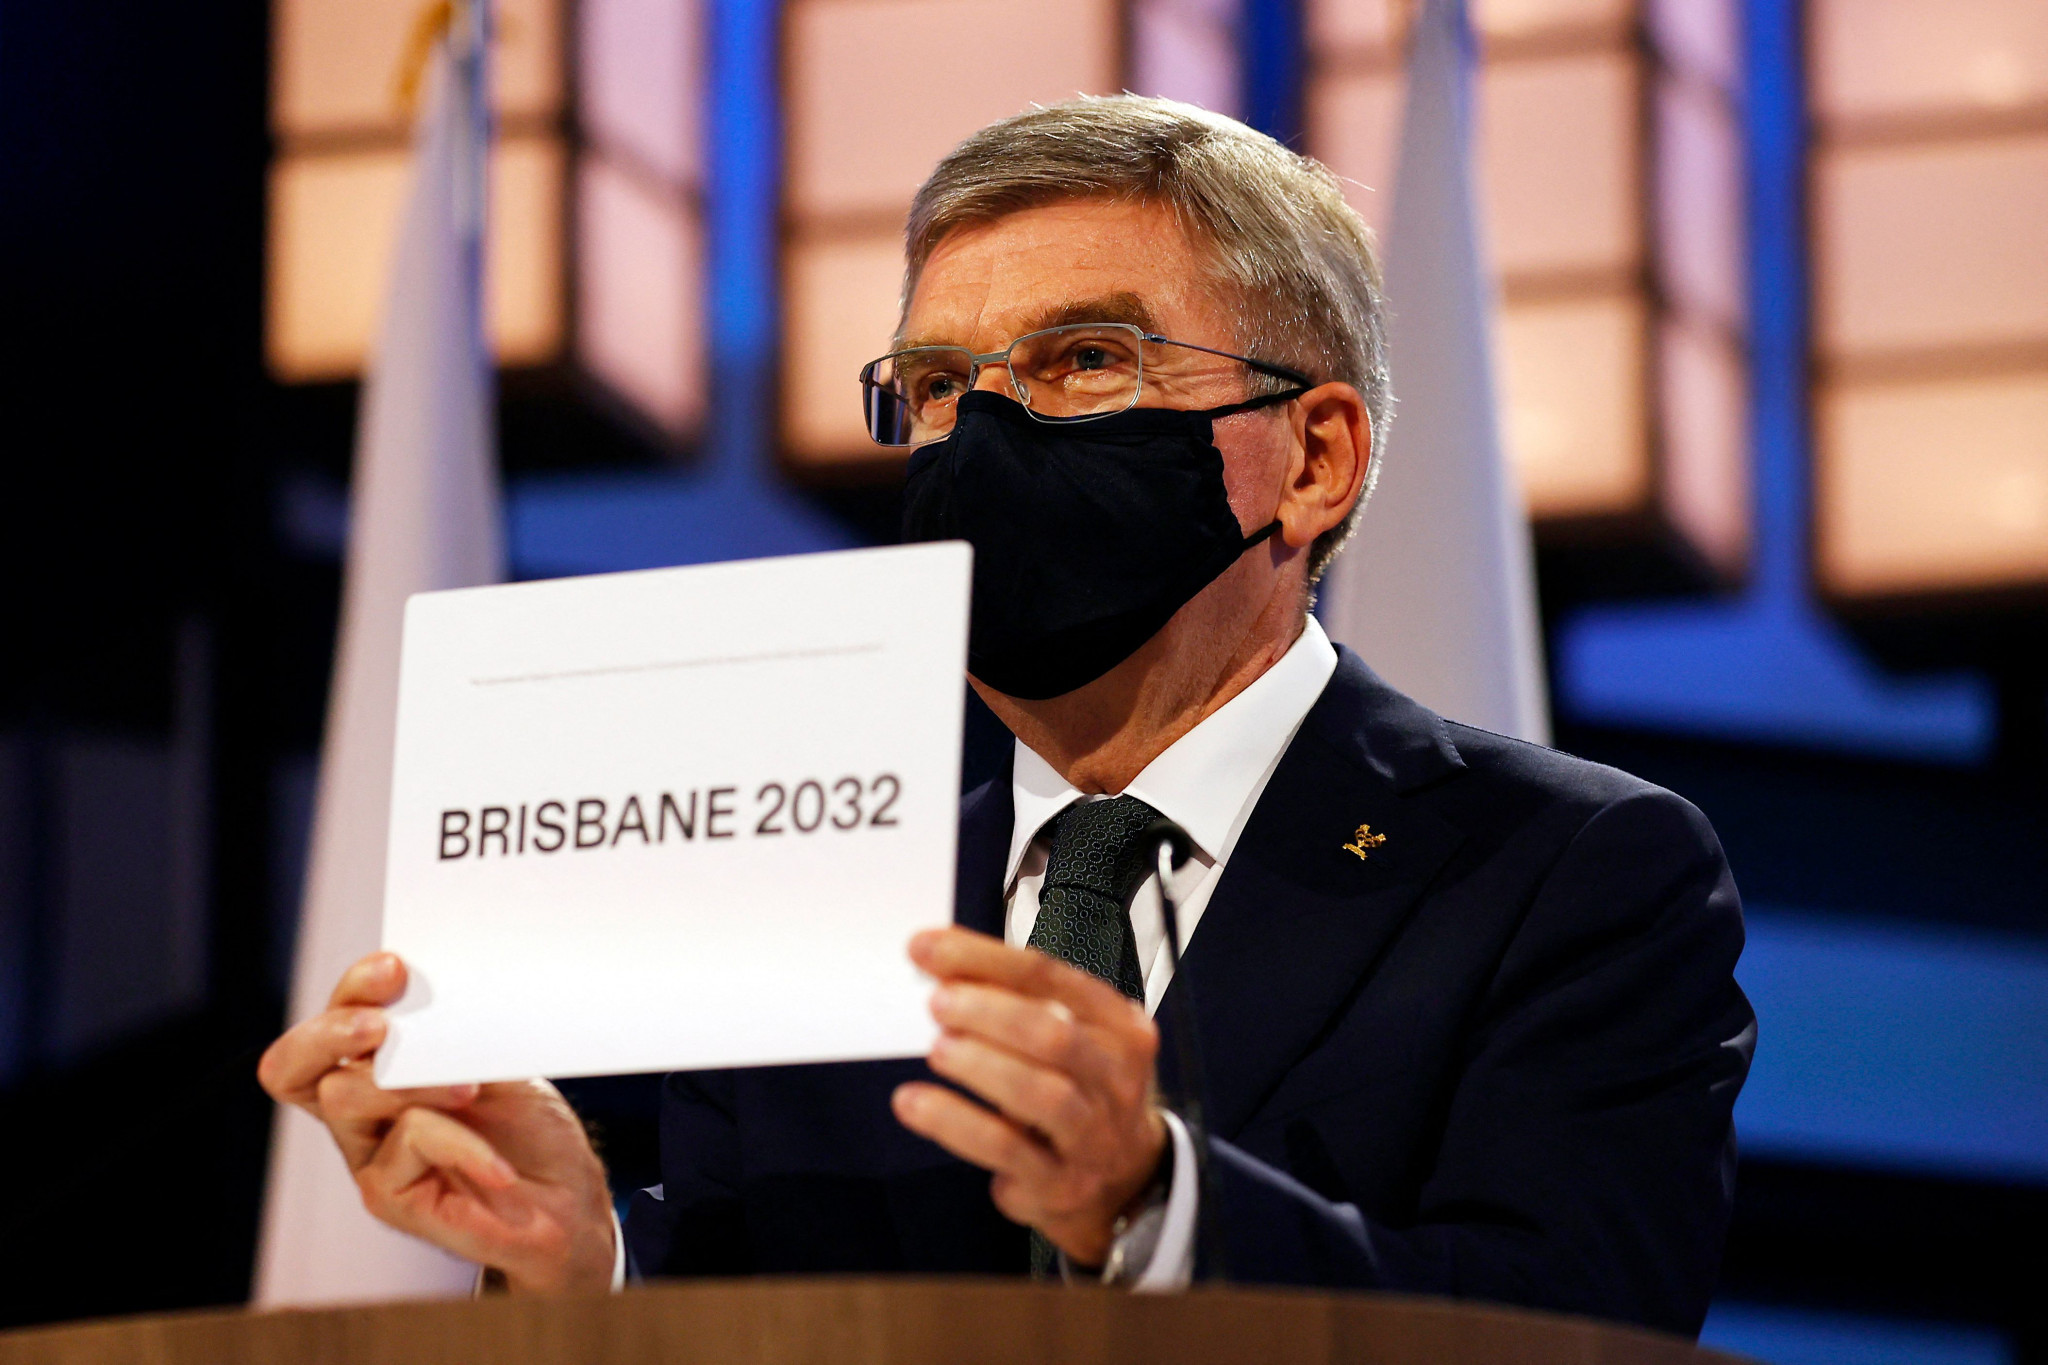 IOC President Thomas Bach unveiled Brisbane as the host of the 2032 Olympics and Paralympics at the IOC Session last year ©Getty Images